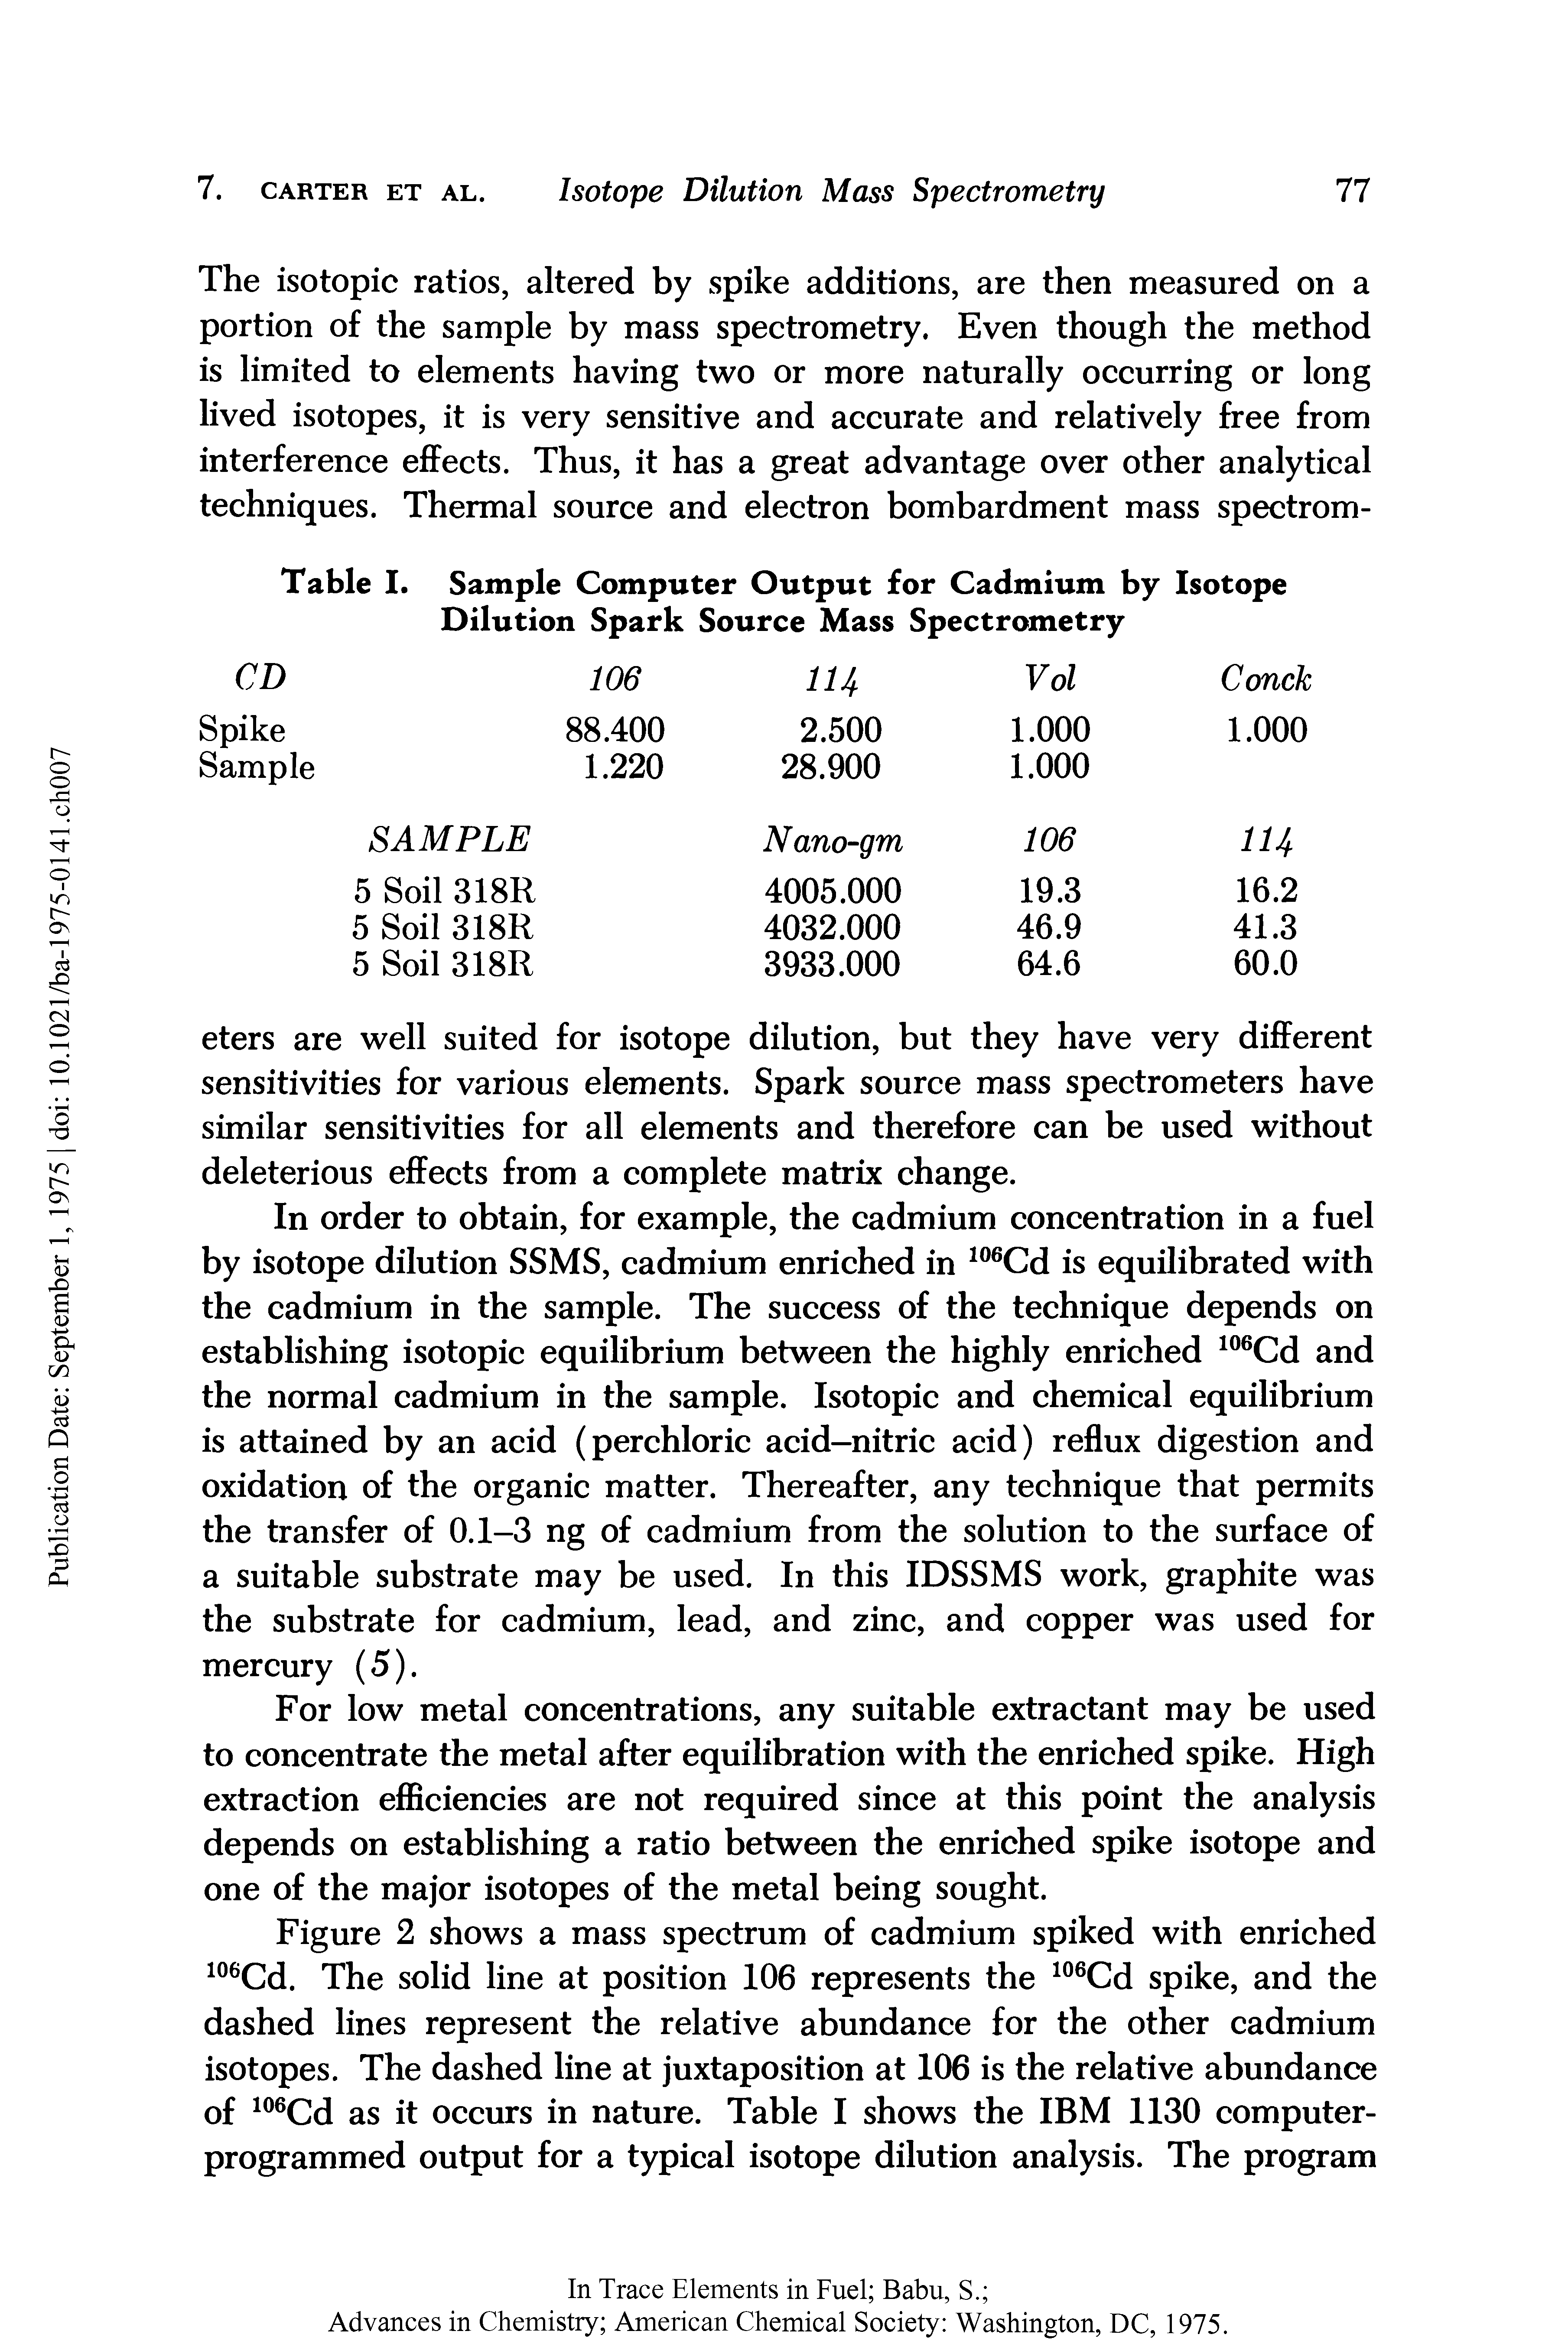 Table I. Sample Computer Output for Cadmium by Isotope Dilution Spark Source Mass Spectrometry...